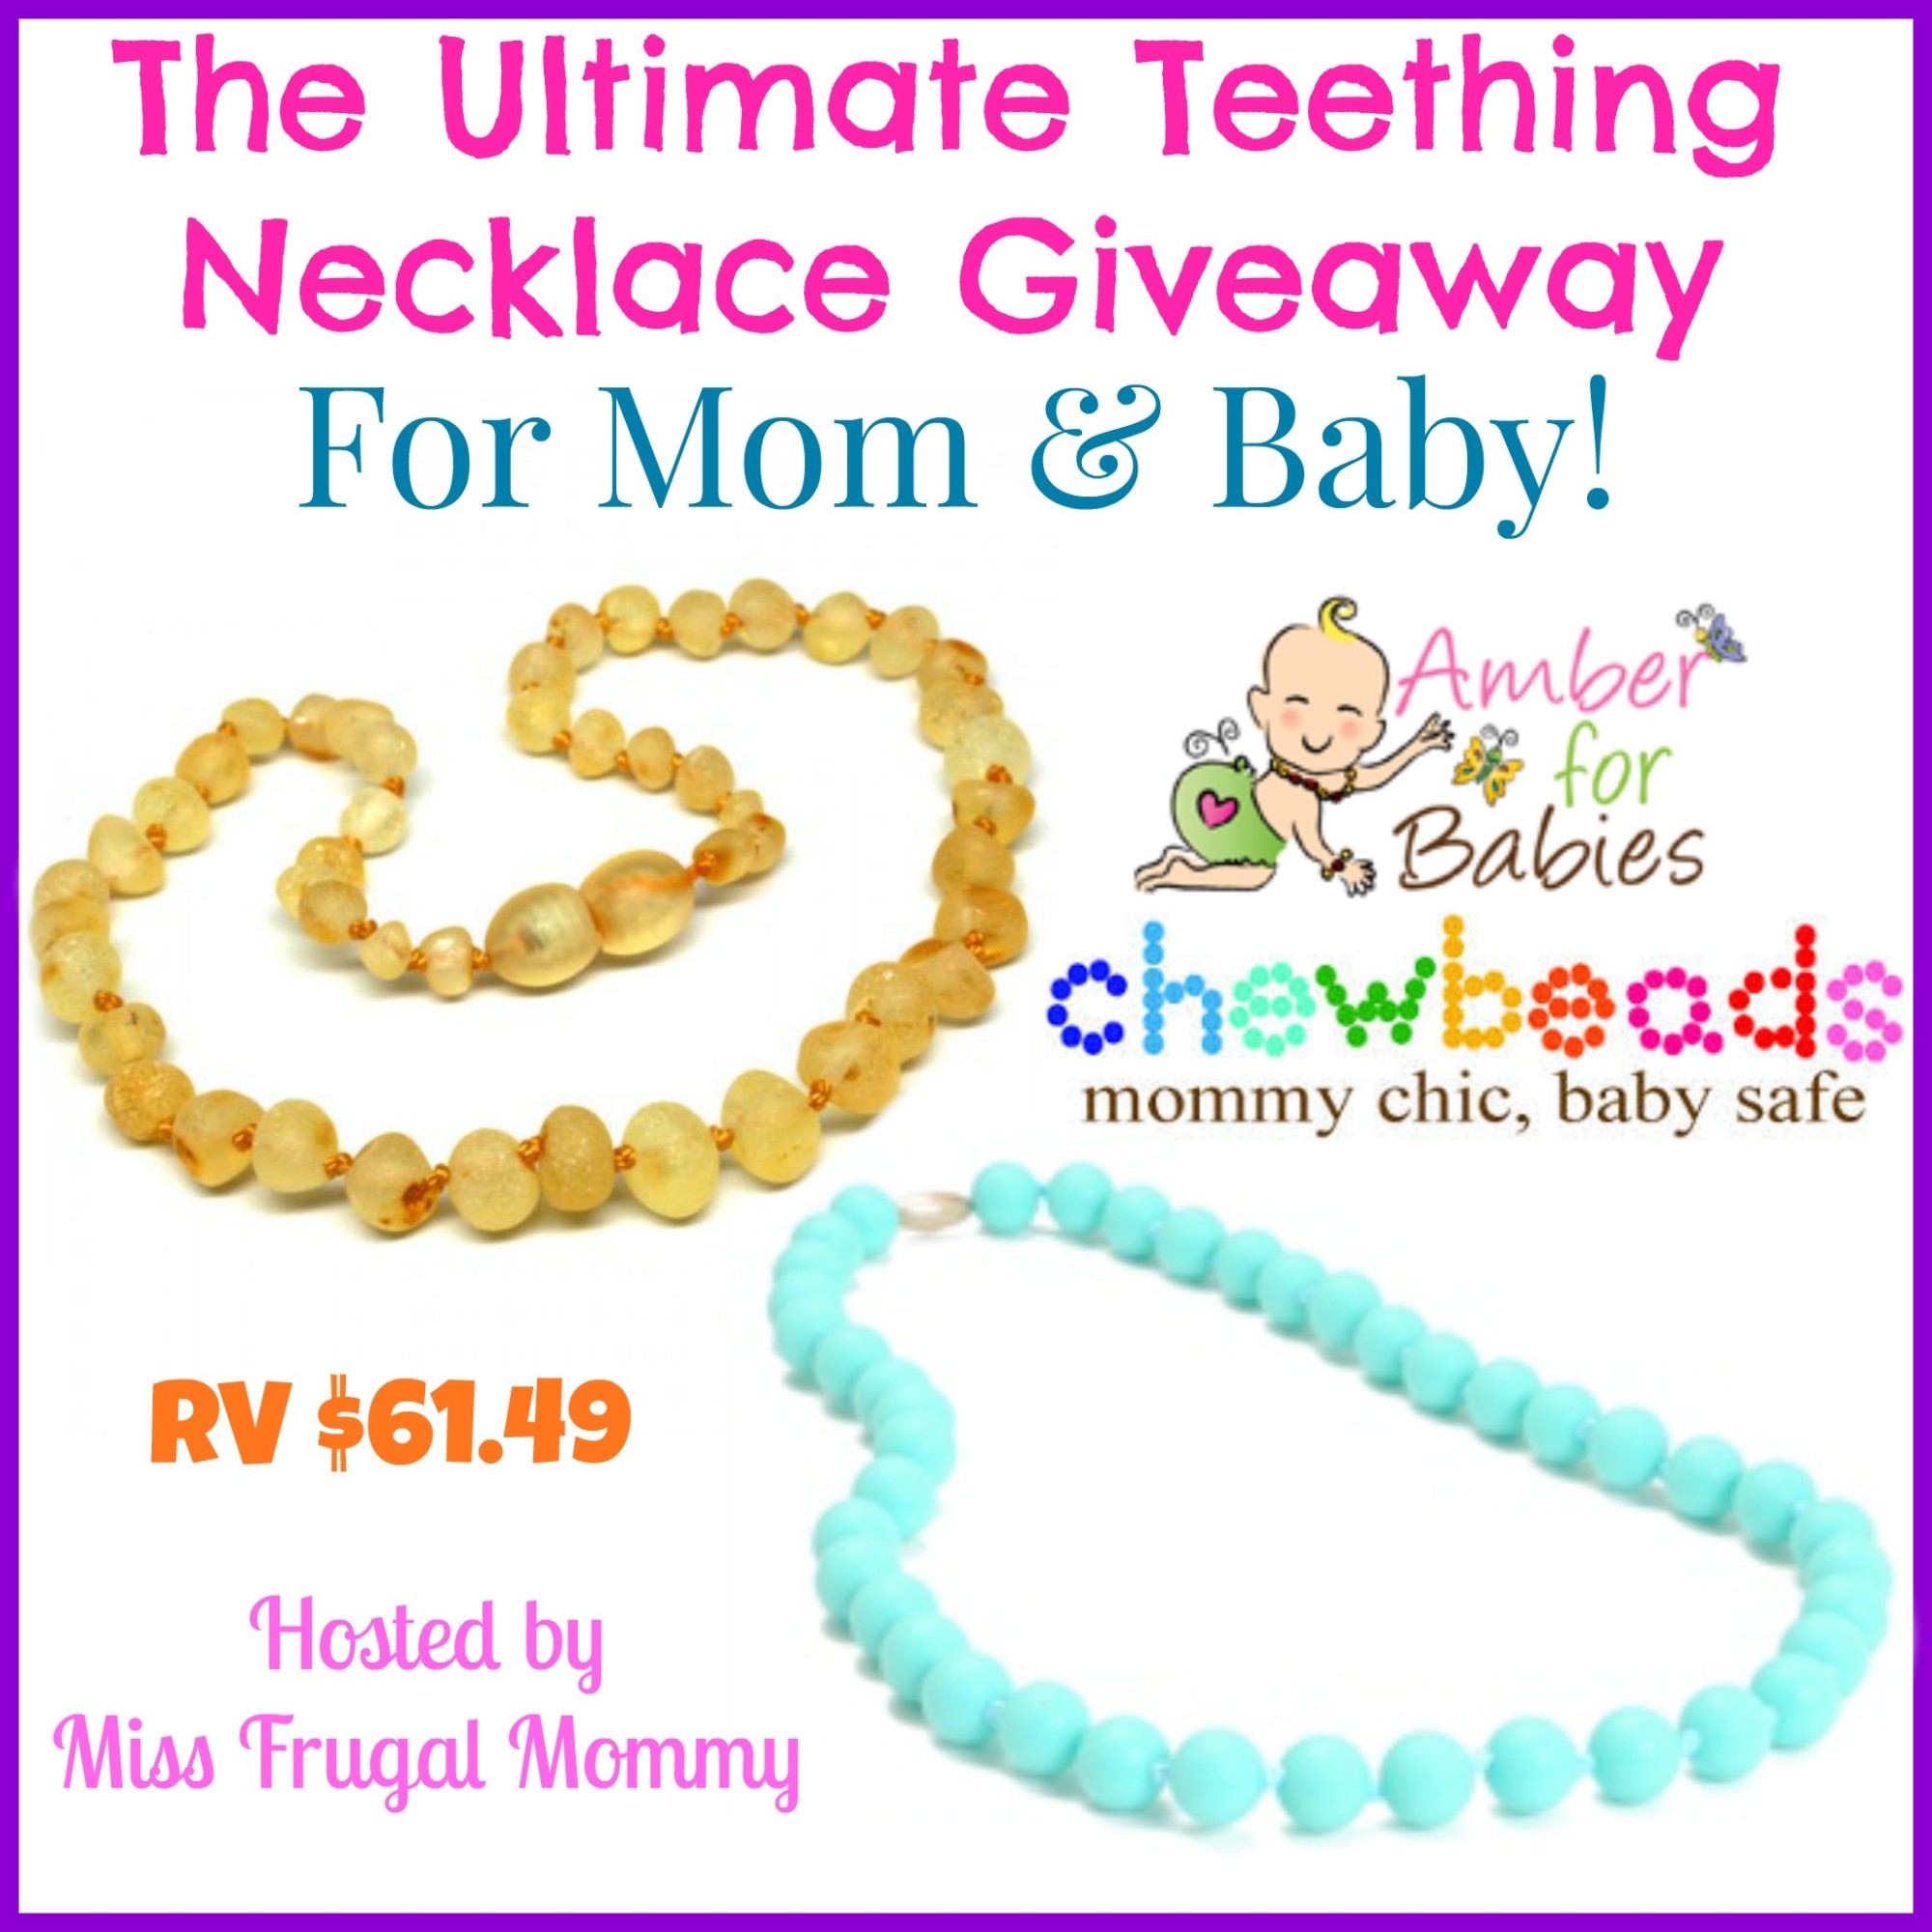 The Ultimate Teething Necklace Giveaway